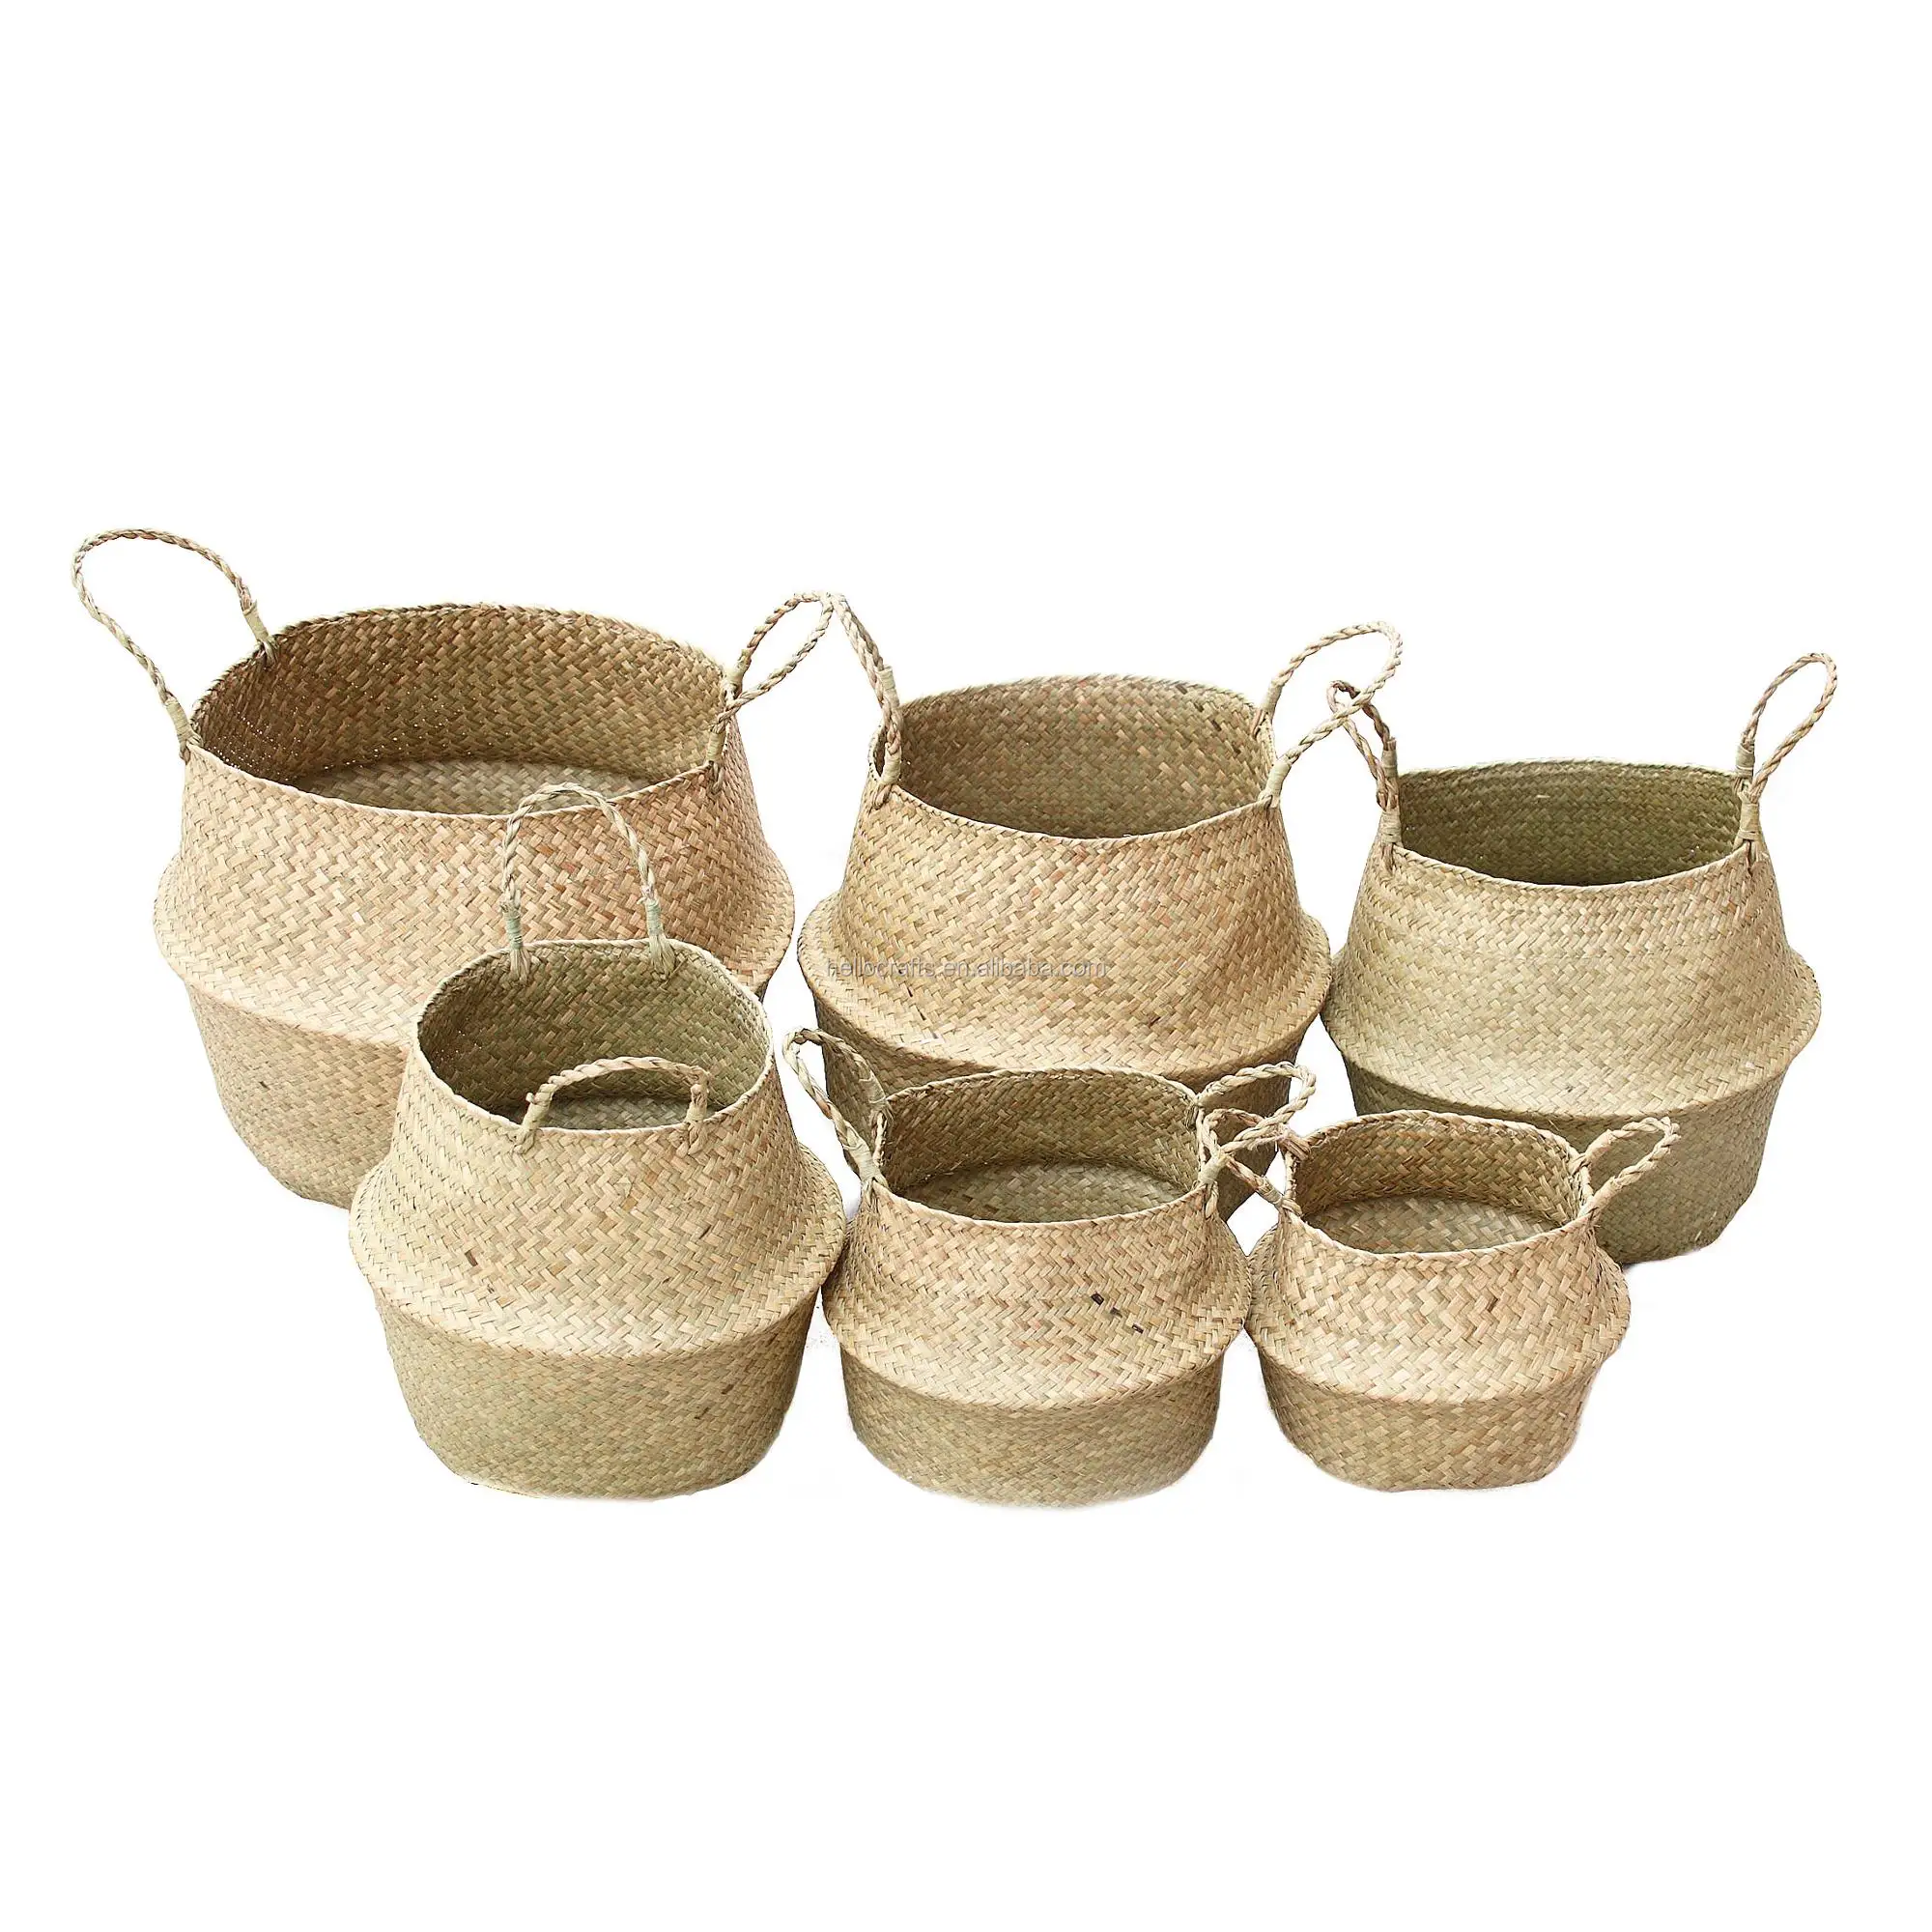 

Hot Sale Natural /colour Woven Seagrass Tote Belly Baskets for Storage, Laundry, Picnic, Plant Pot Cover, and Beach Bag, Natural, white, pink blue,black, white wavy